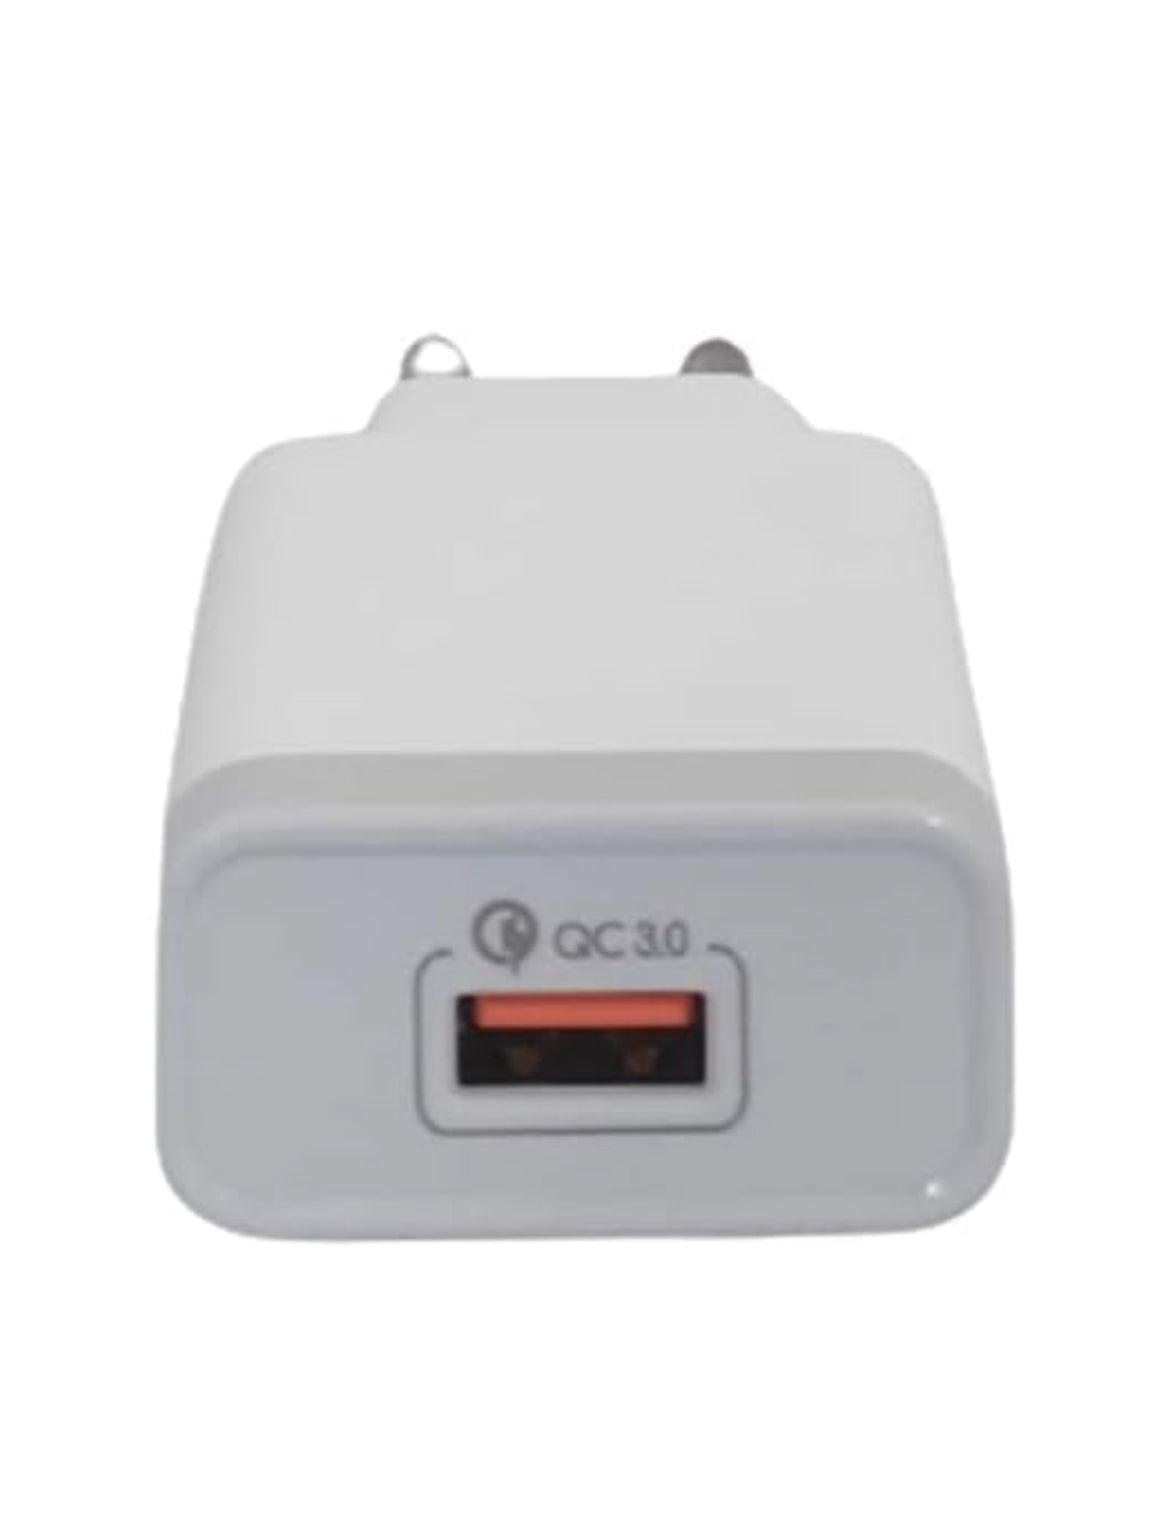 JTP 18W Qualcomm QC 3.0 Wall Charger Fast Charging Adapter with Micro/Type-C/Lightning USB Data Cable